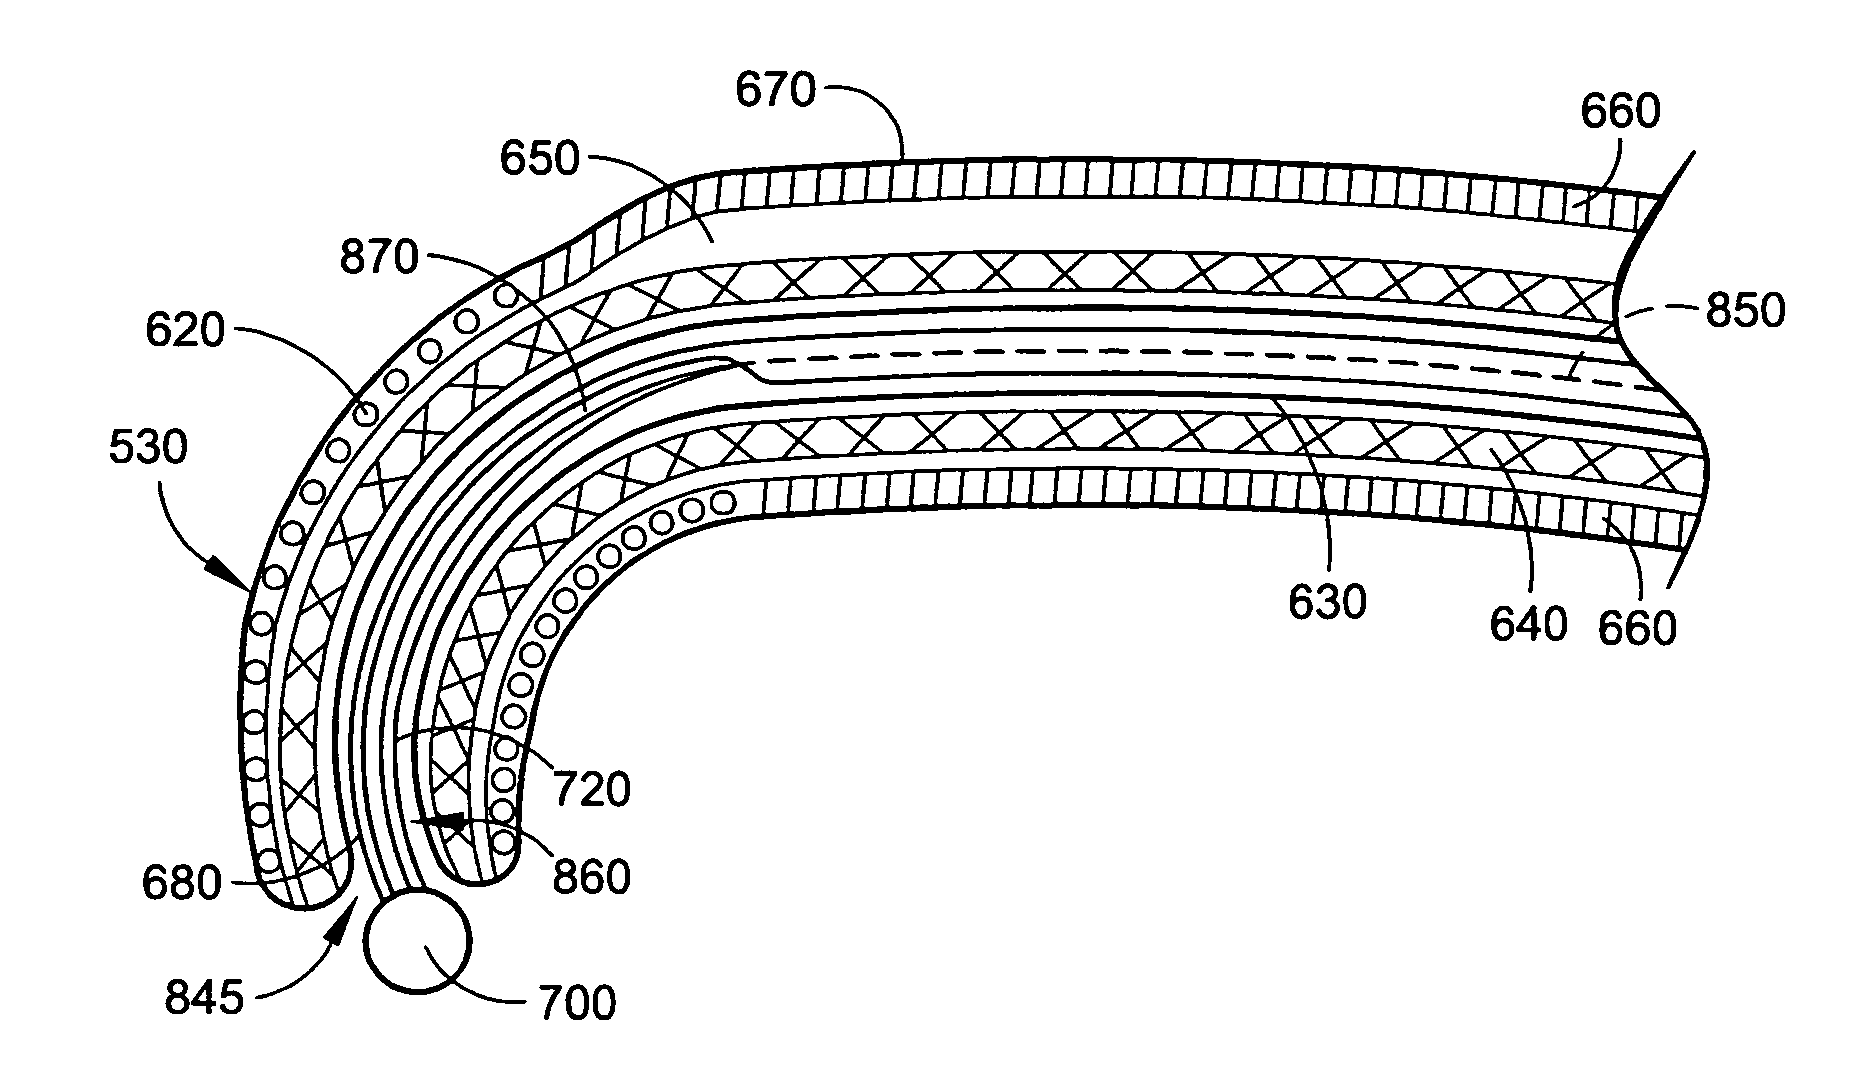 Radio-frequency-based catheter system with improved deflection and steering mechanisms